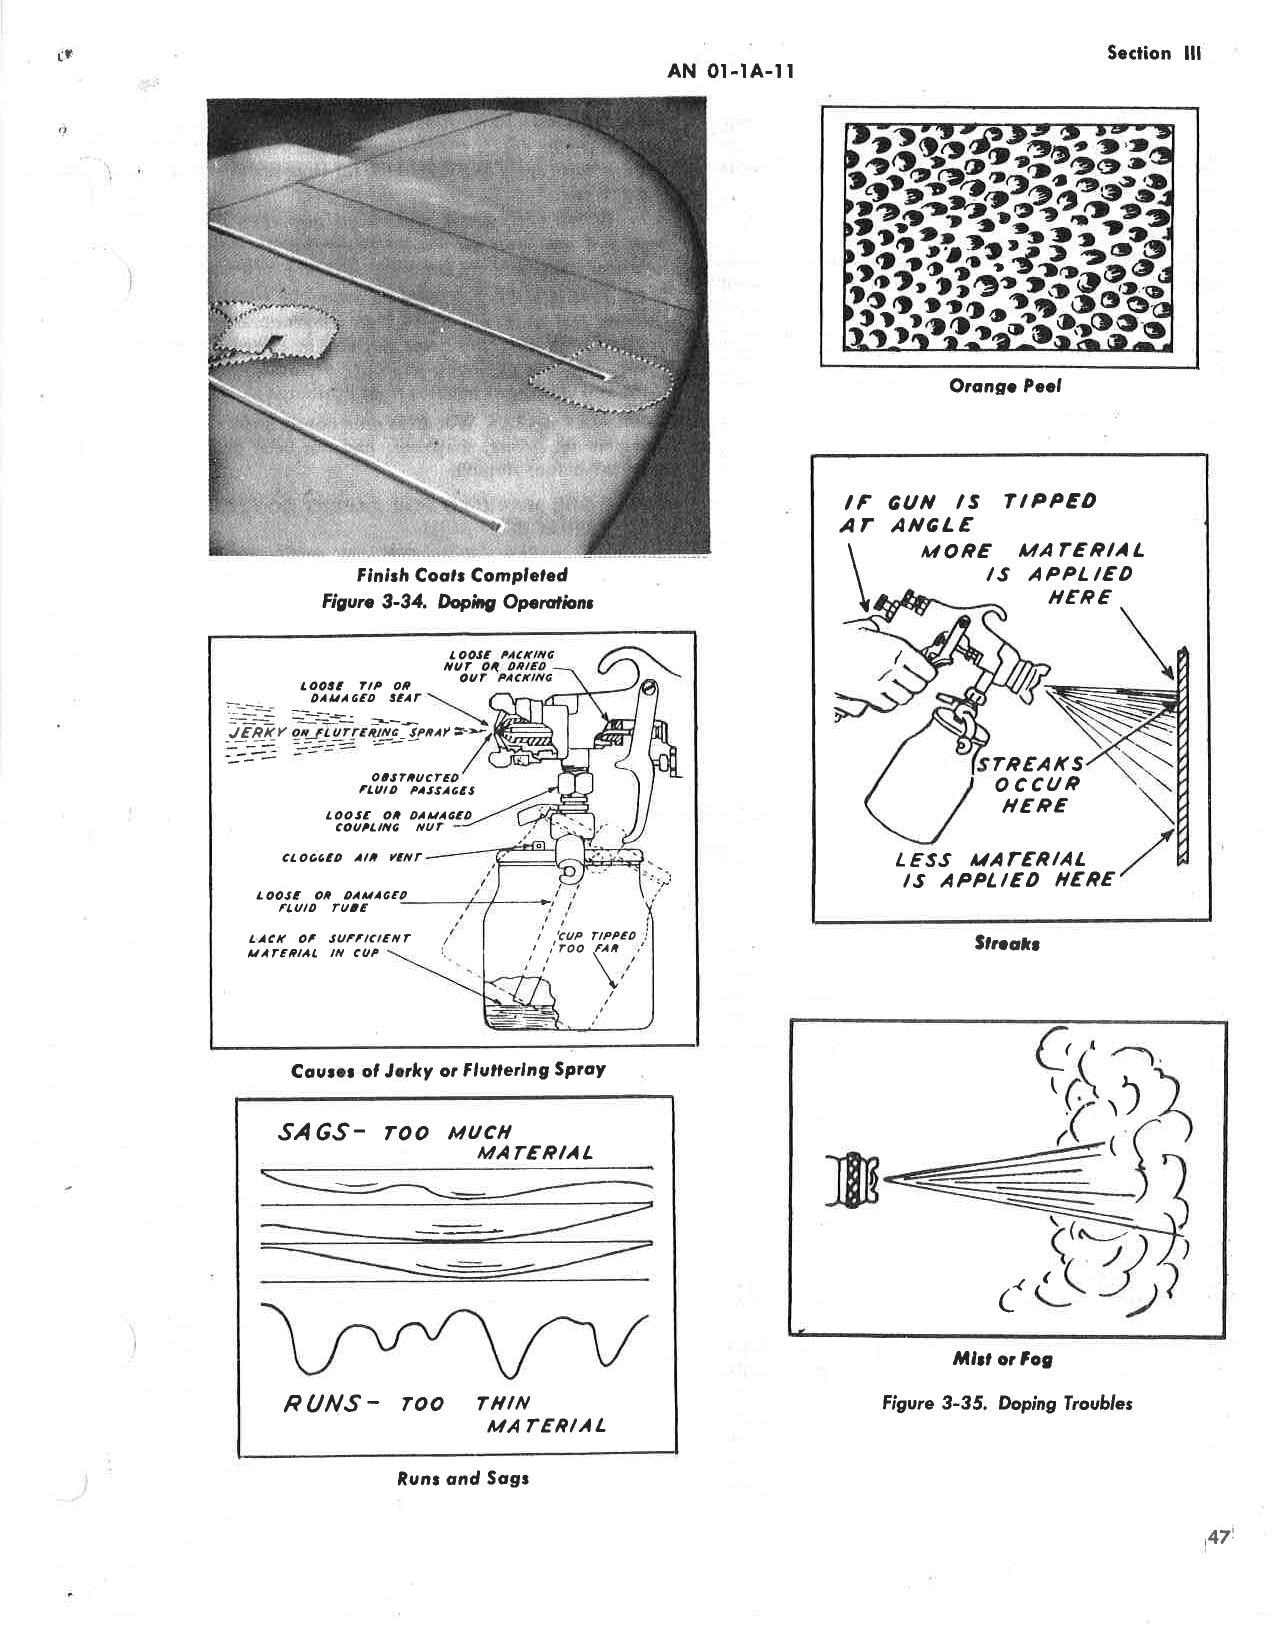 Sample page 52 from AirCorps Library document: Fabric Repair and Doping - Engineering Handbook Series for Aircraft Repair